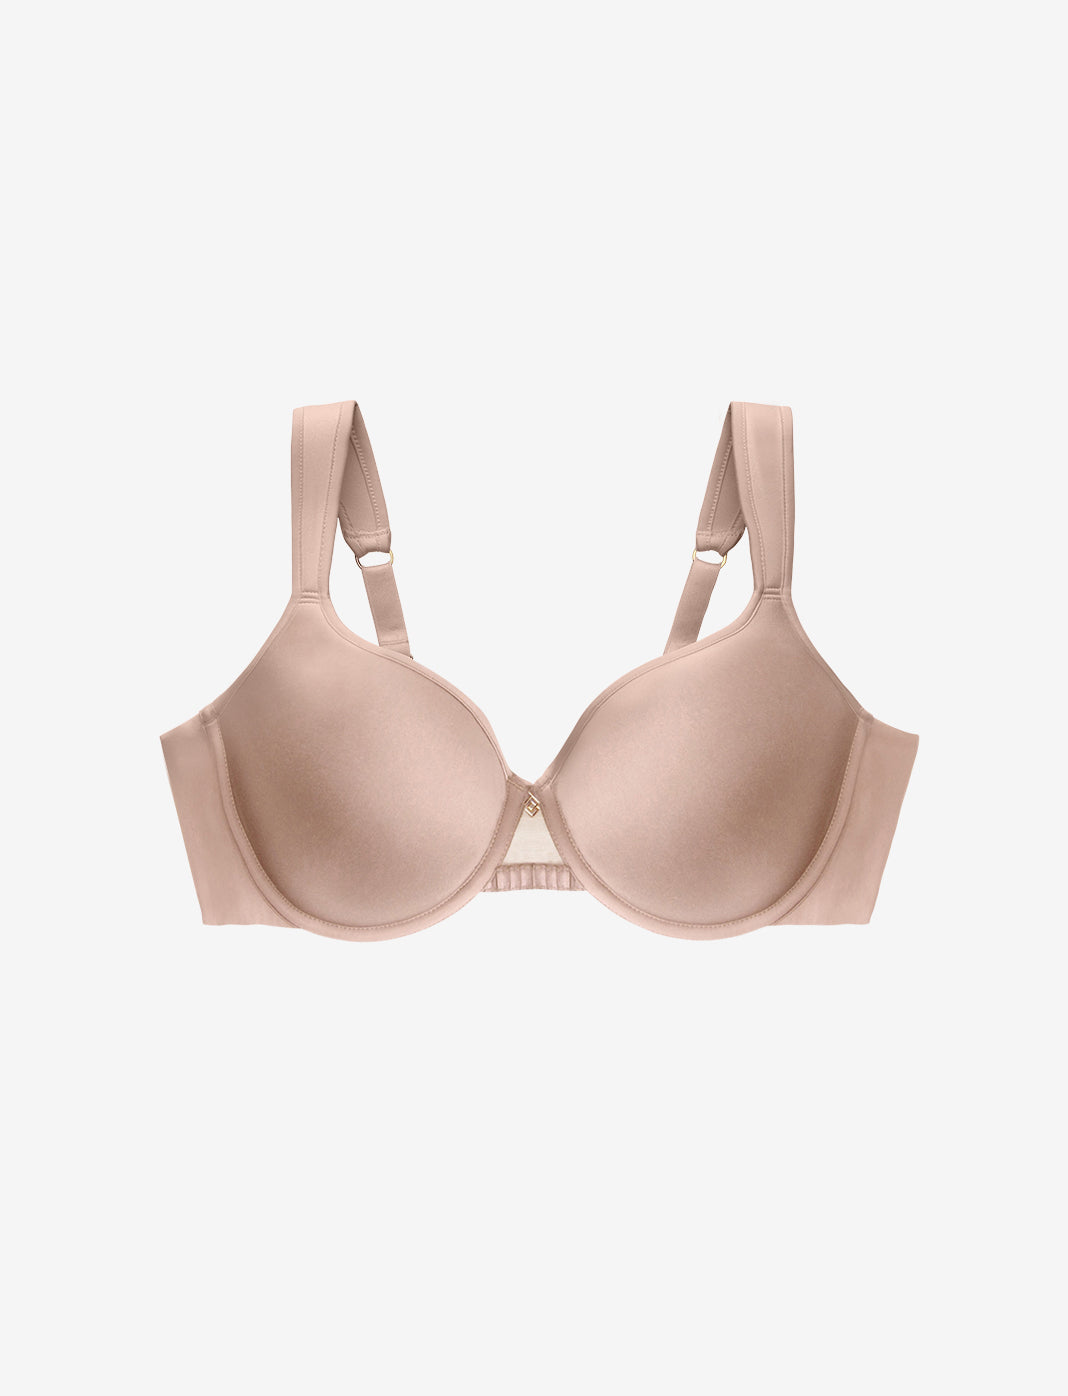 LOVABLE Woman's White My Daily Comfort bra with underwiring